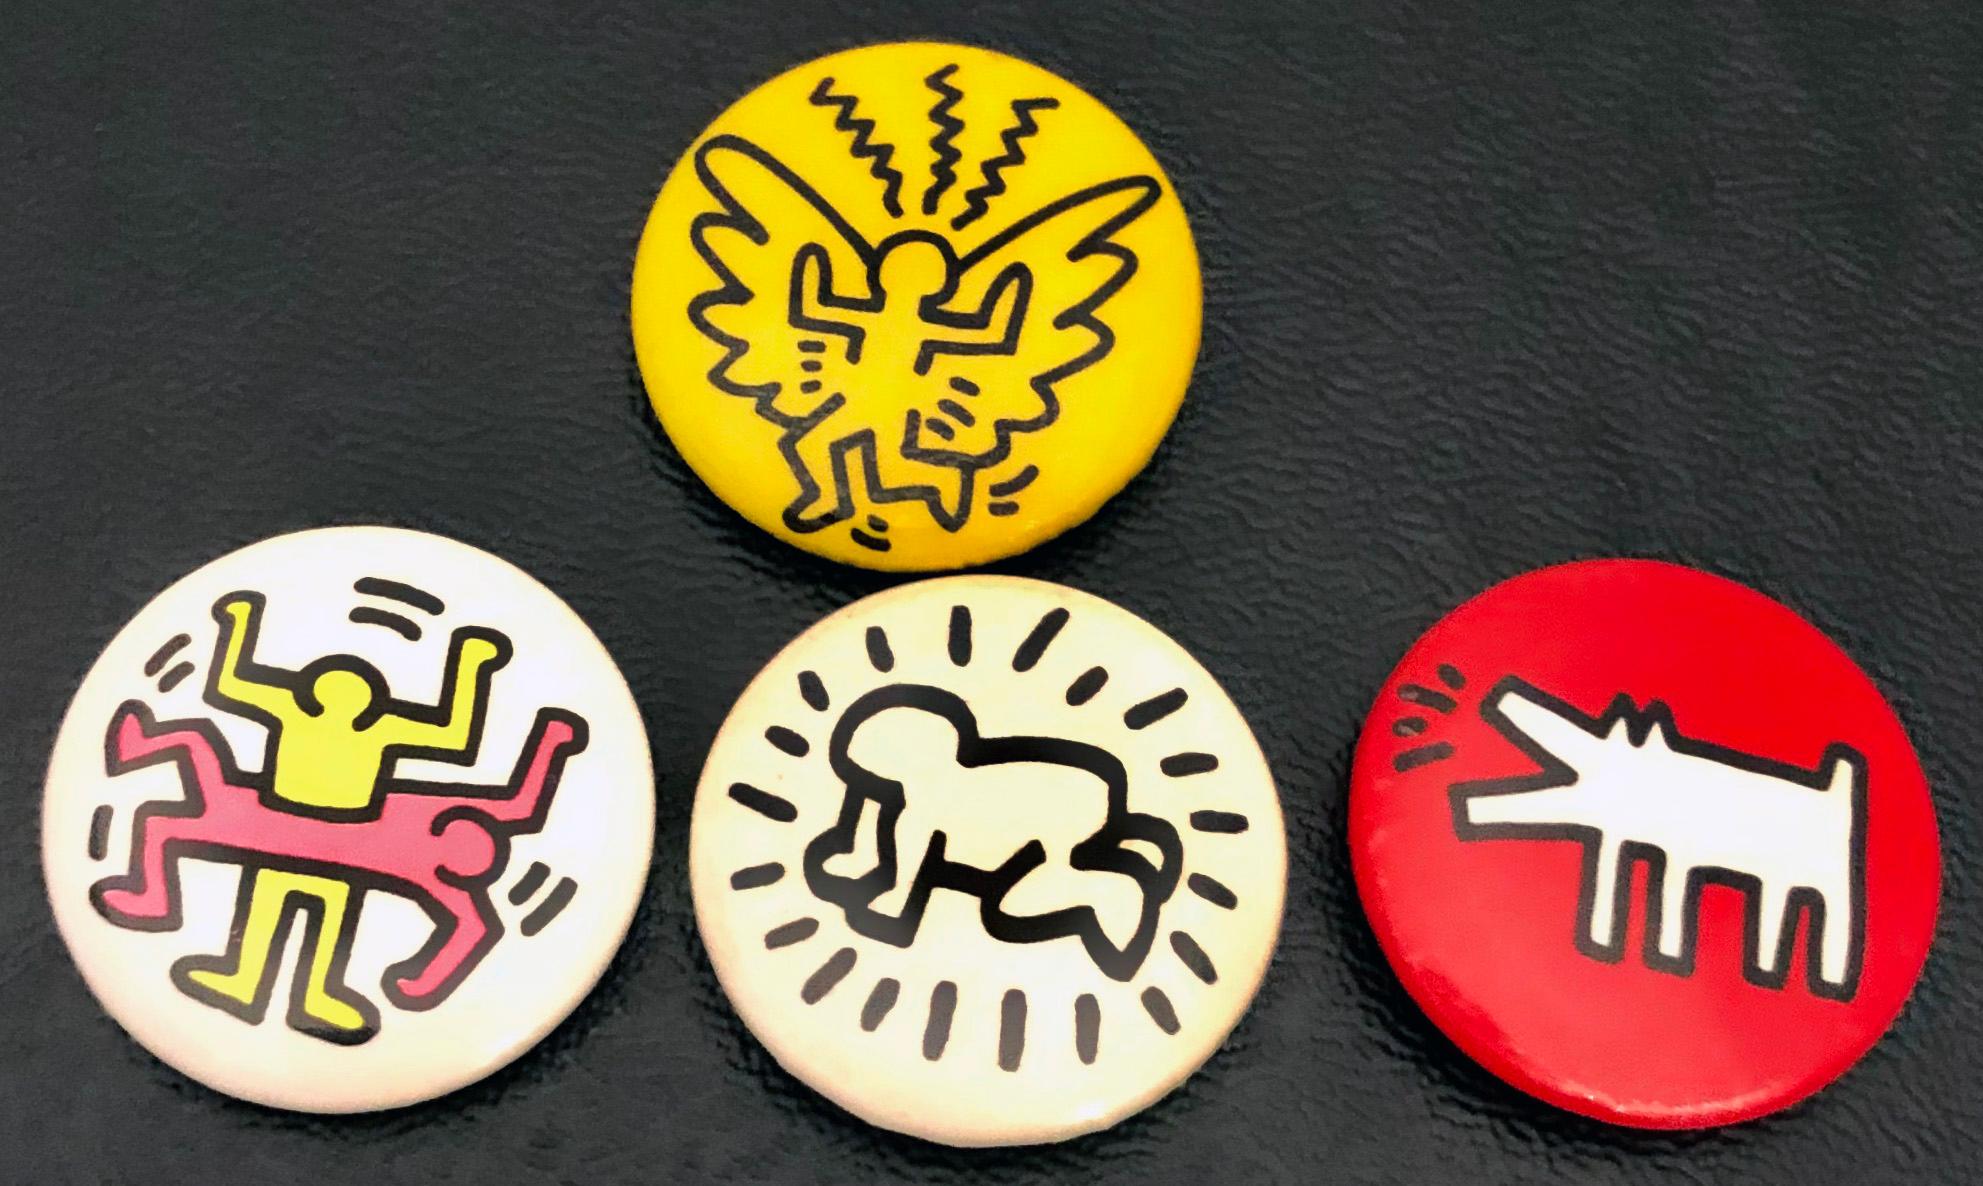 Keith Haring badges #2 32mm metal pin back button badge set of 4 Art lover. 